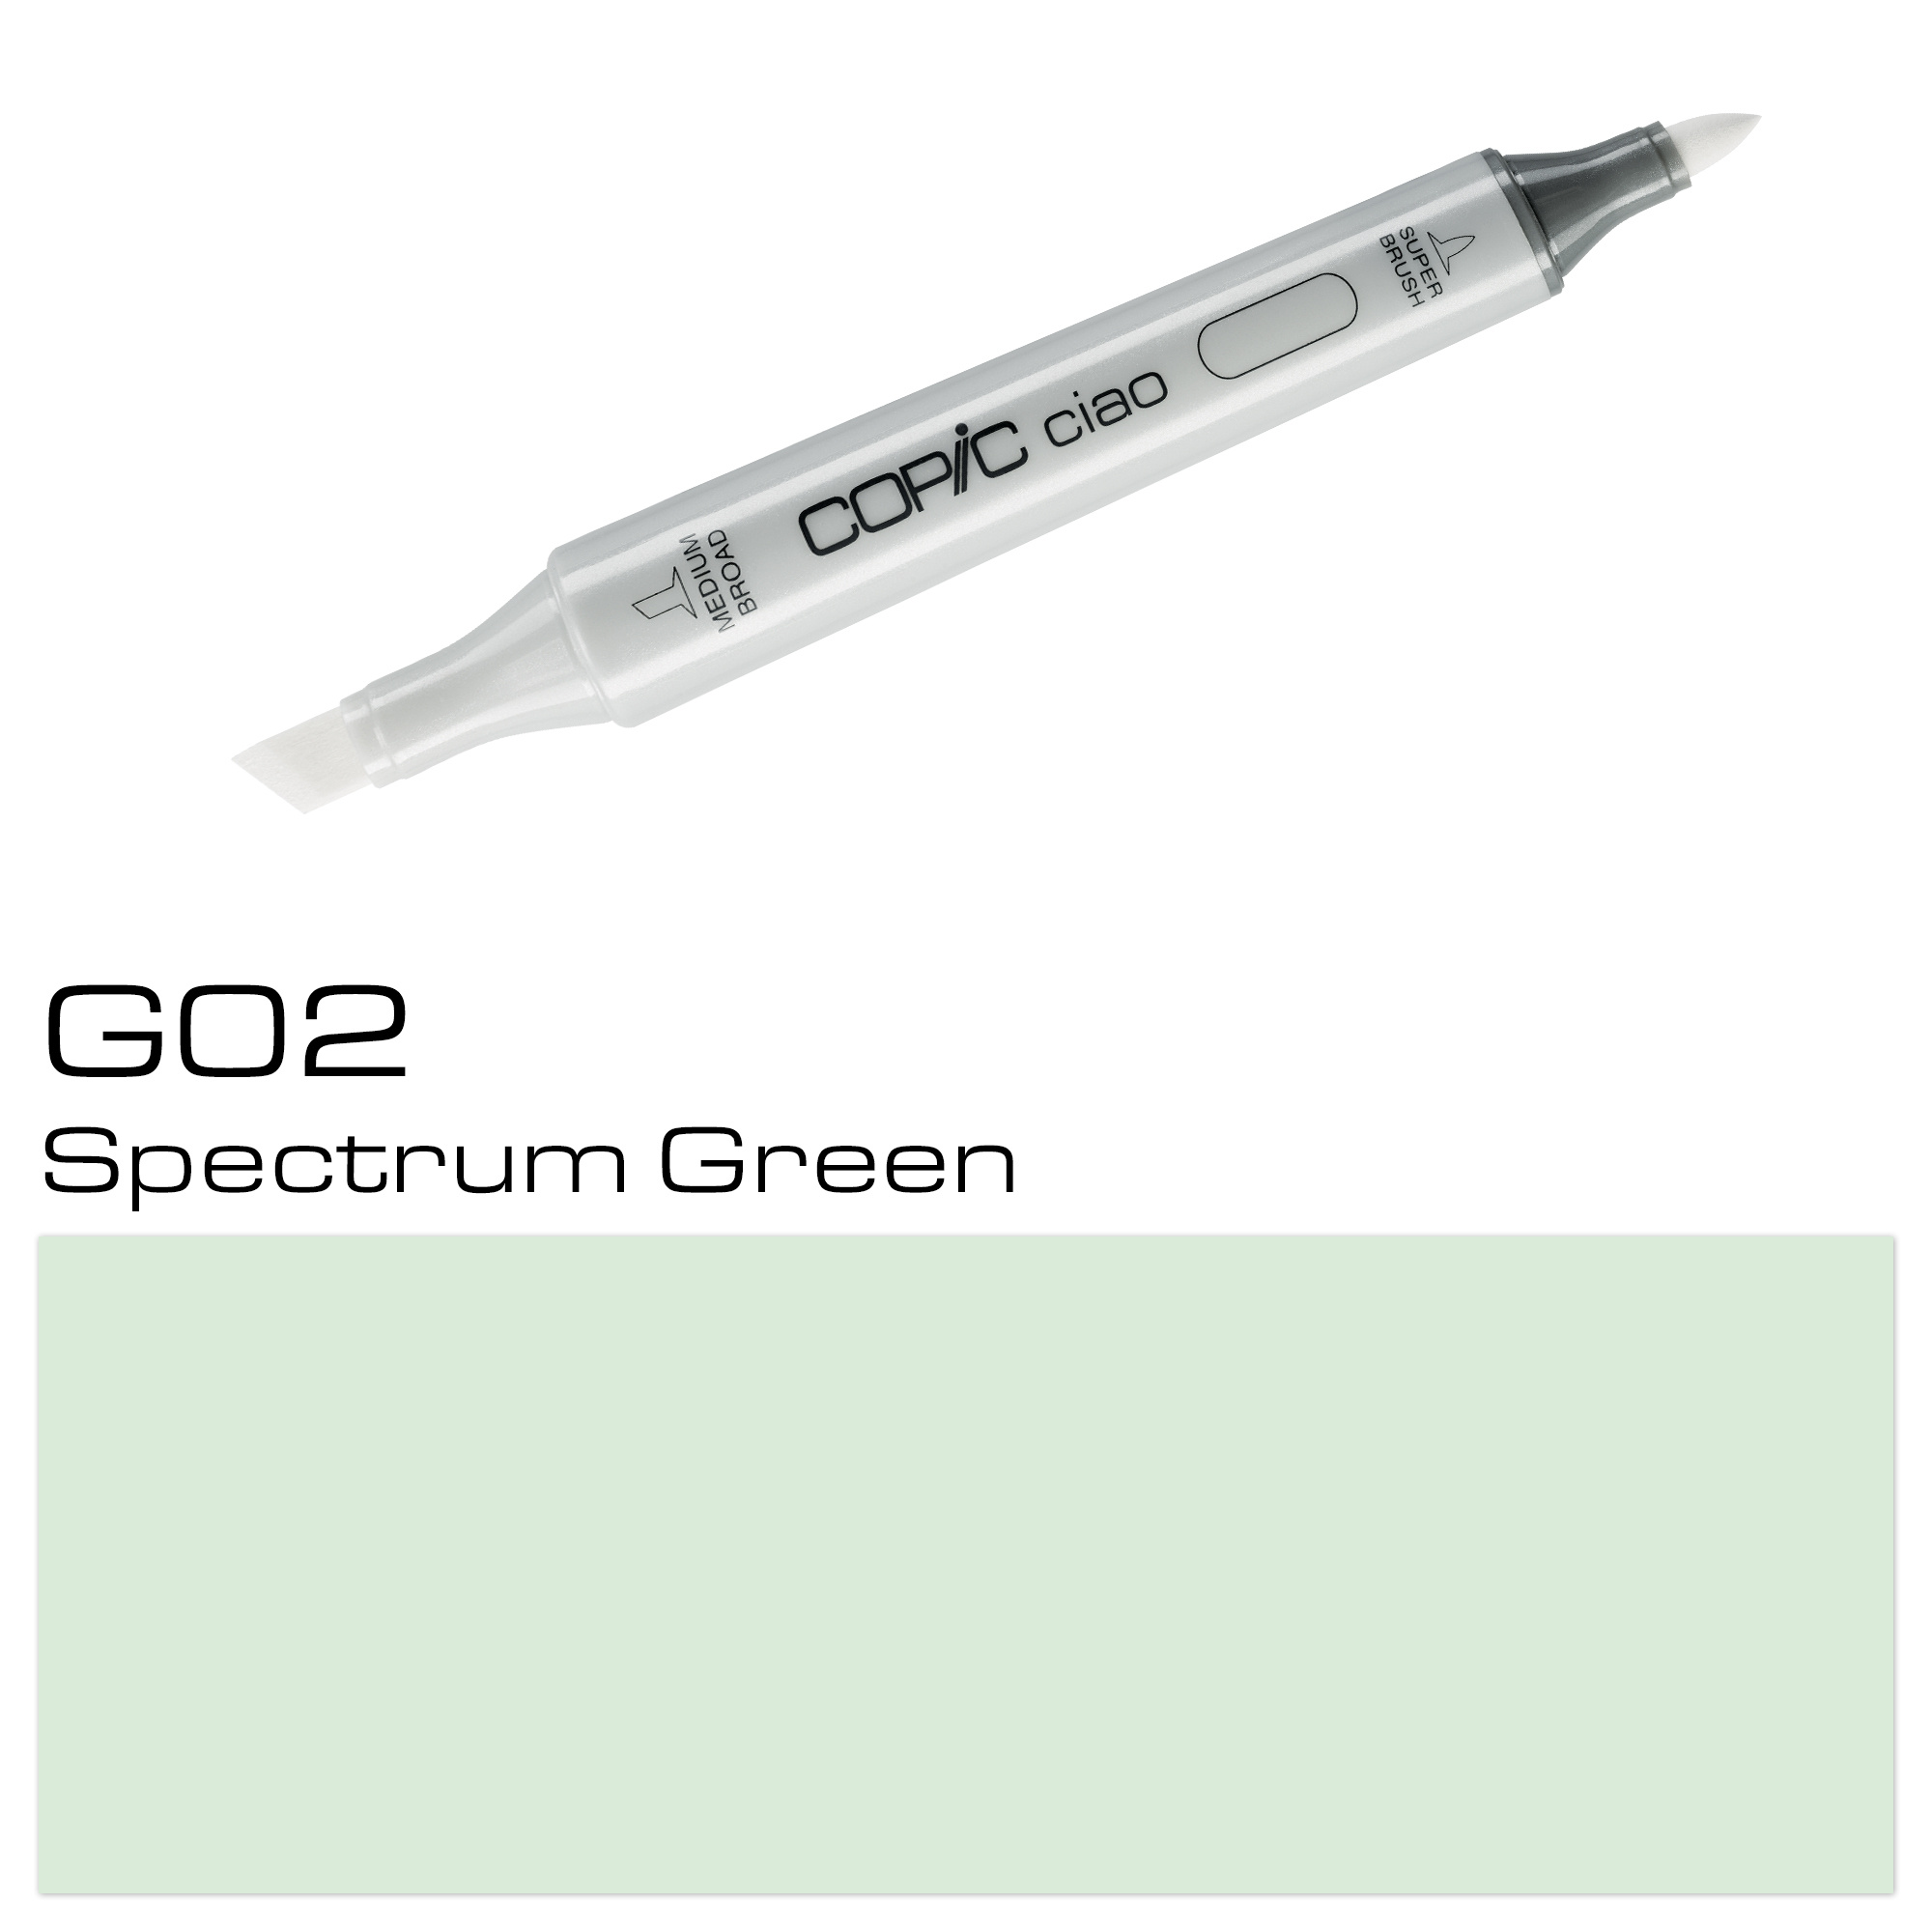 COPIC CIAO SPECTRUM GREEN G02